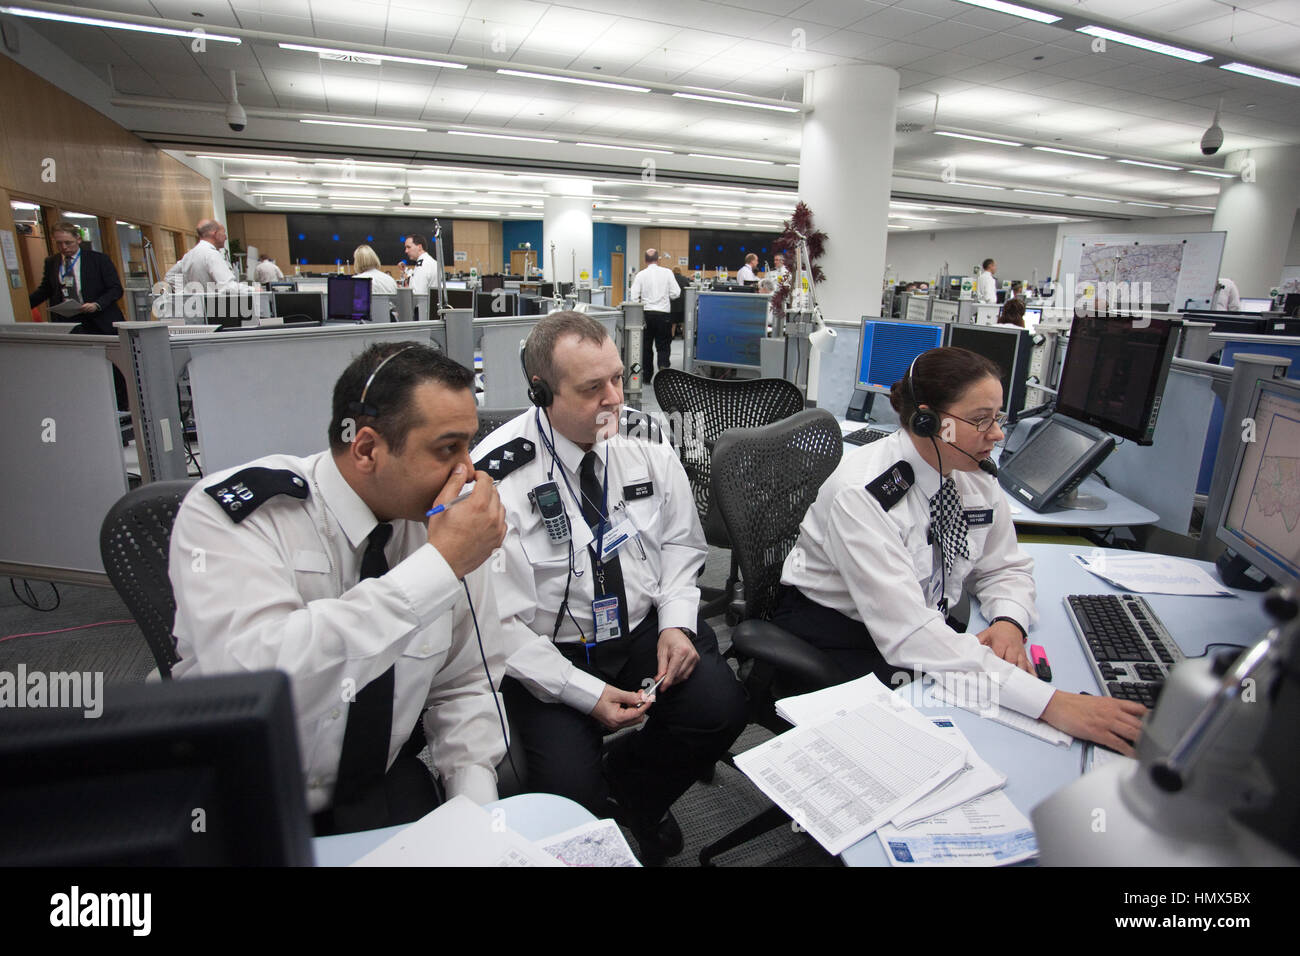 Metropolitan Police Central Communications Command Centre, Operational Command Unit of London's Metropolitan Police Service, Lambeth, London, England. Stock Photo